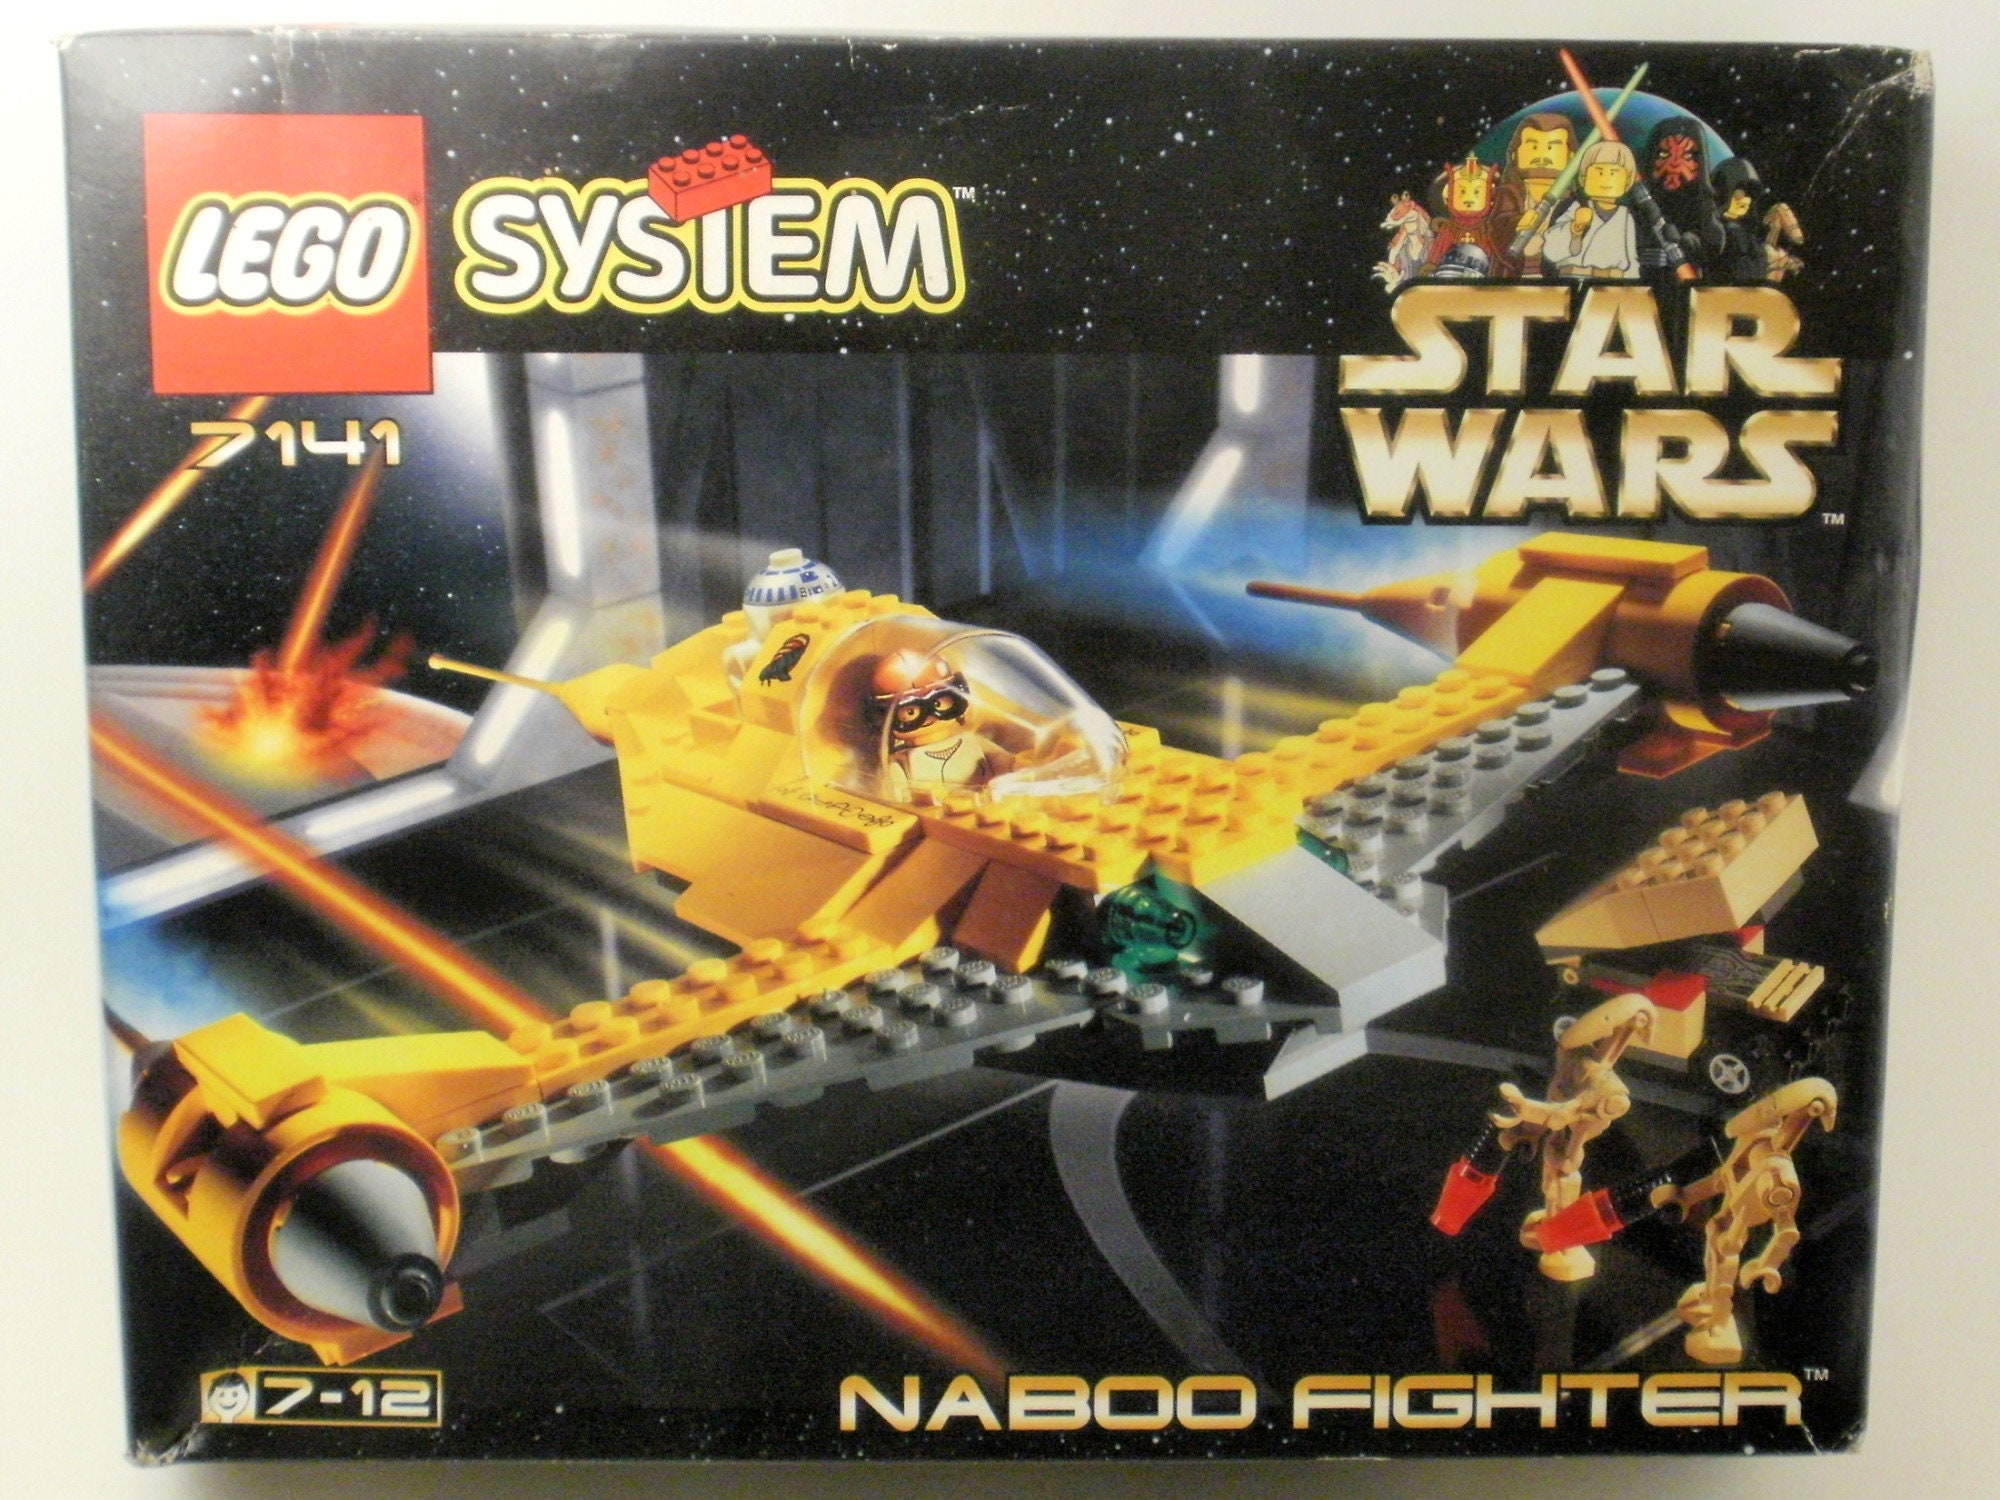 LEGO STAR WARS Episode 1 Figther 1999 Etsy